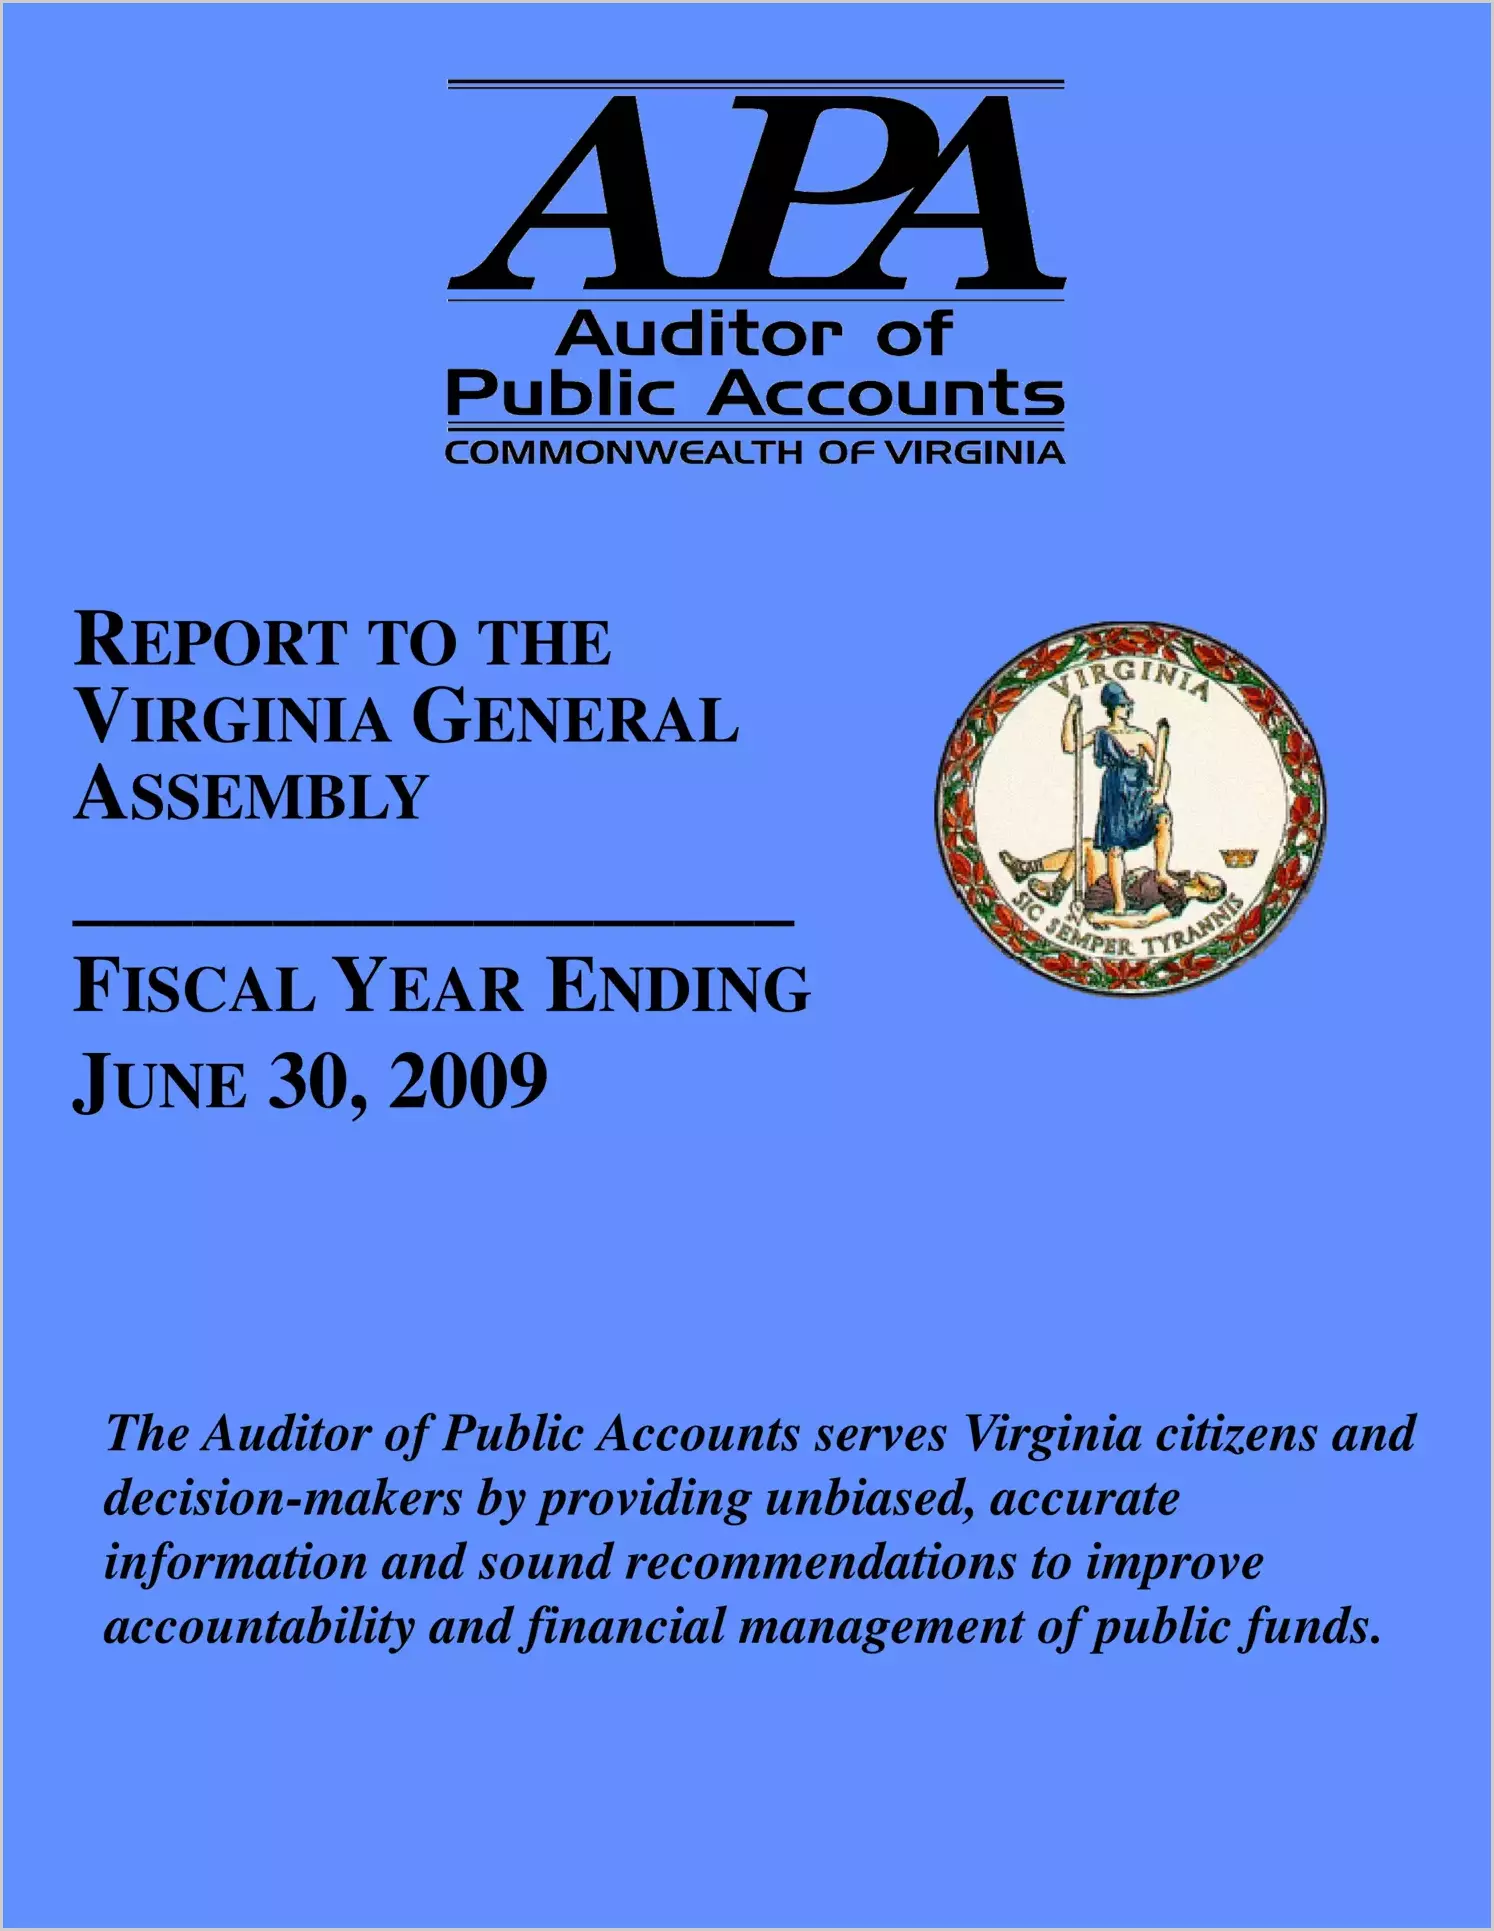 Auditor of Public Accounts Annual Report to the General Assembly for 2009